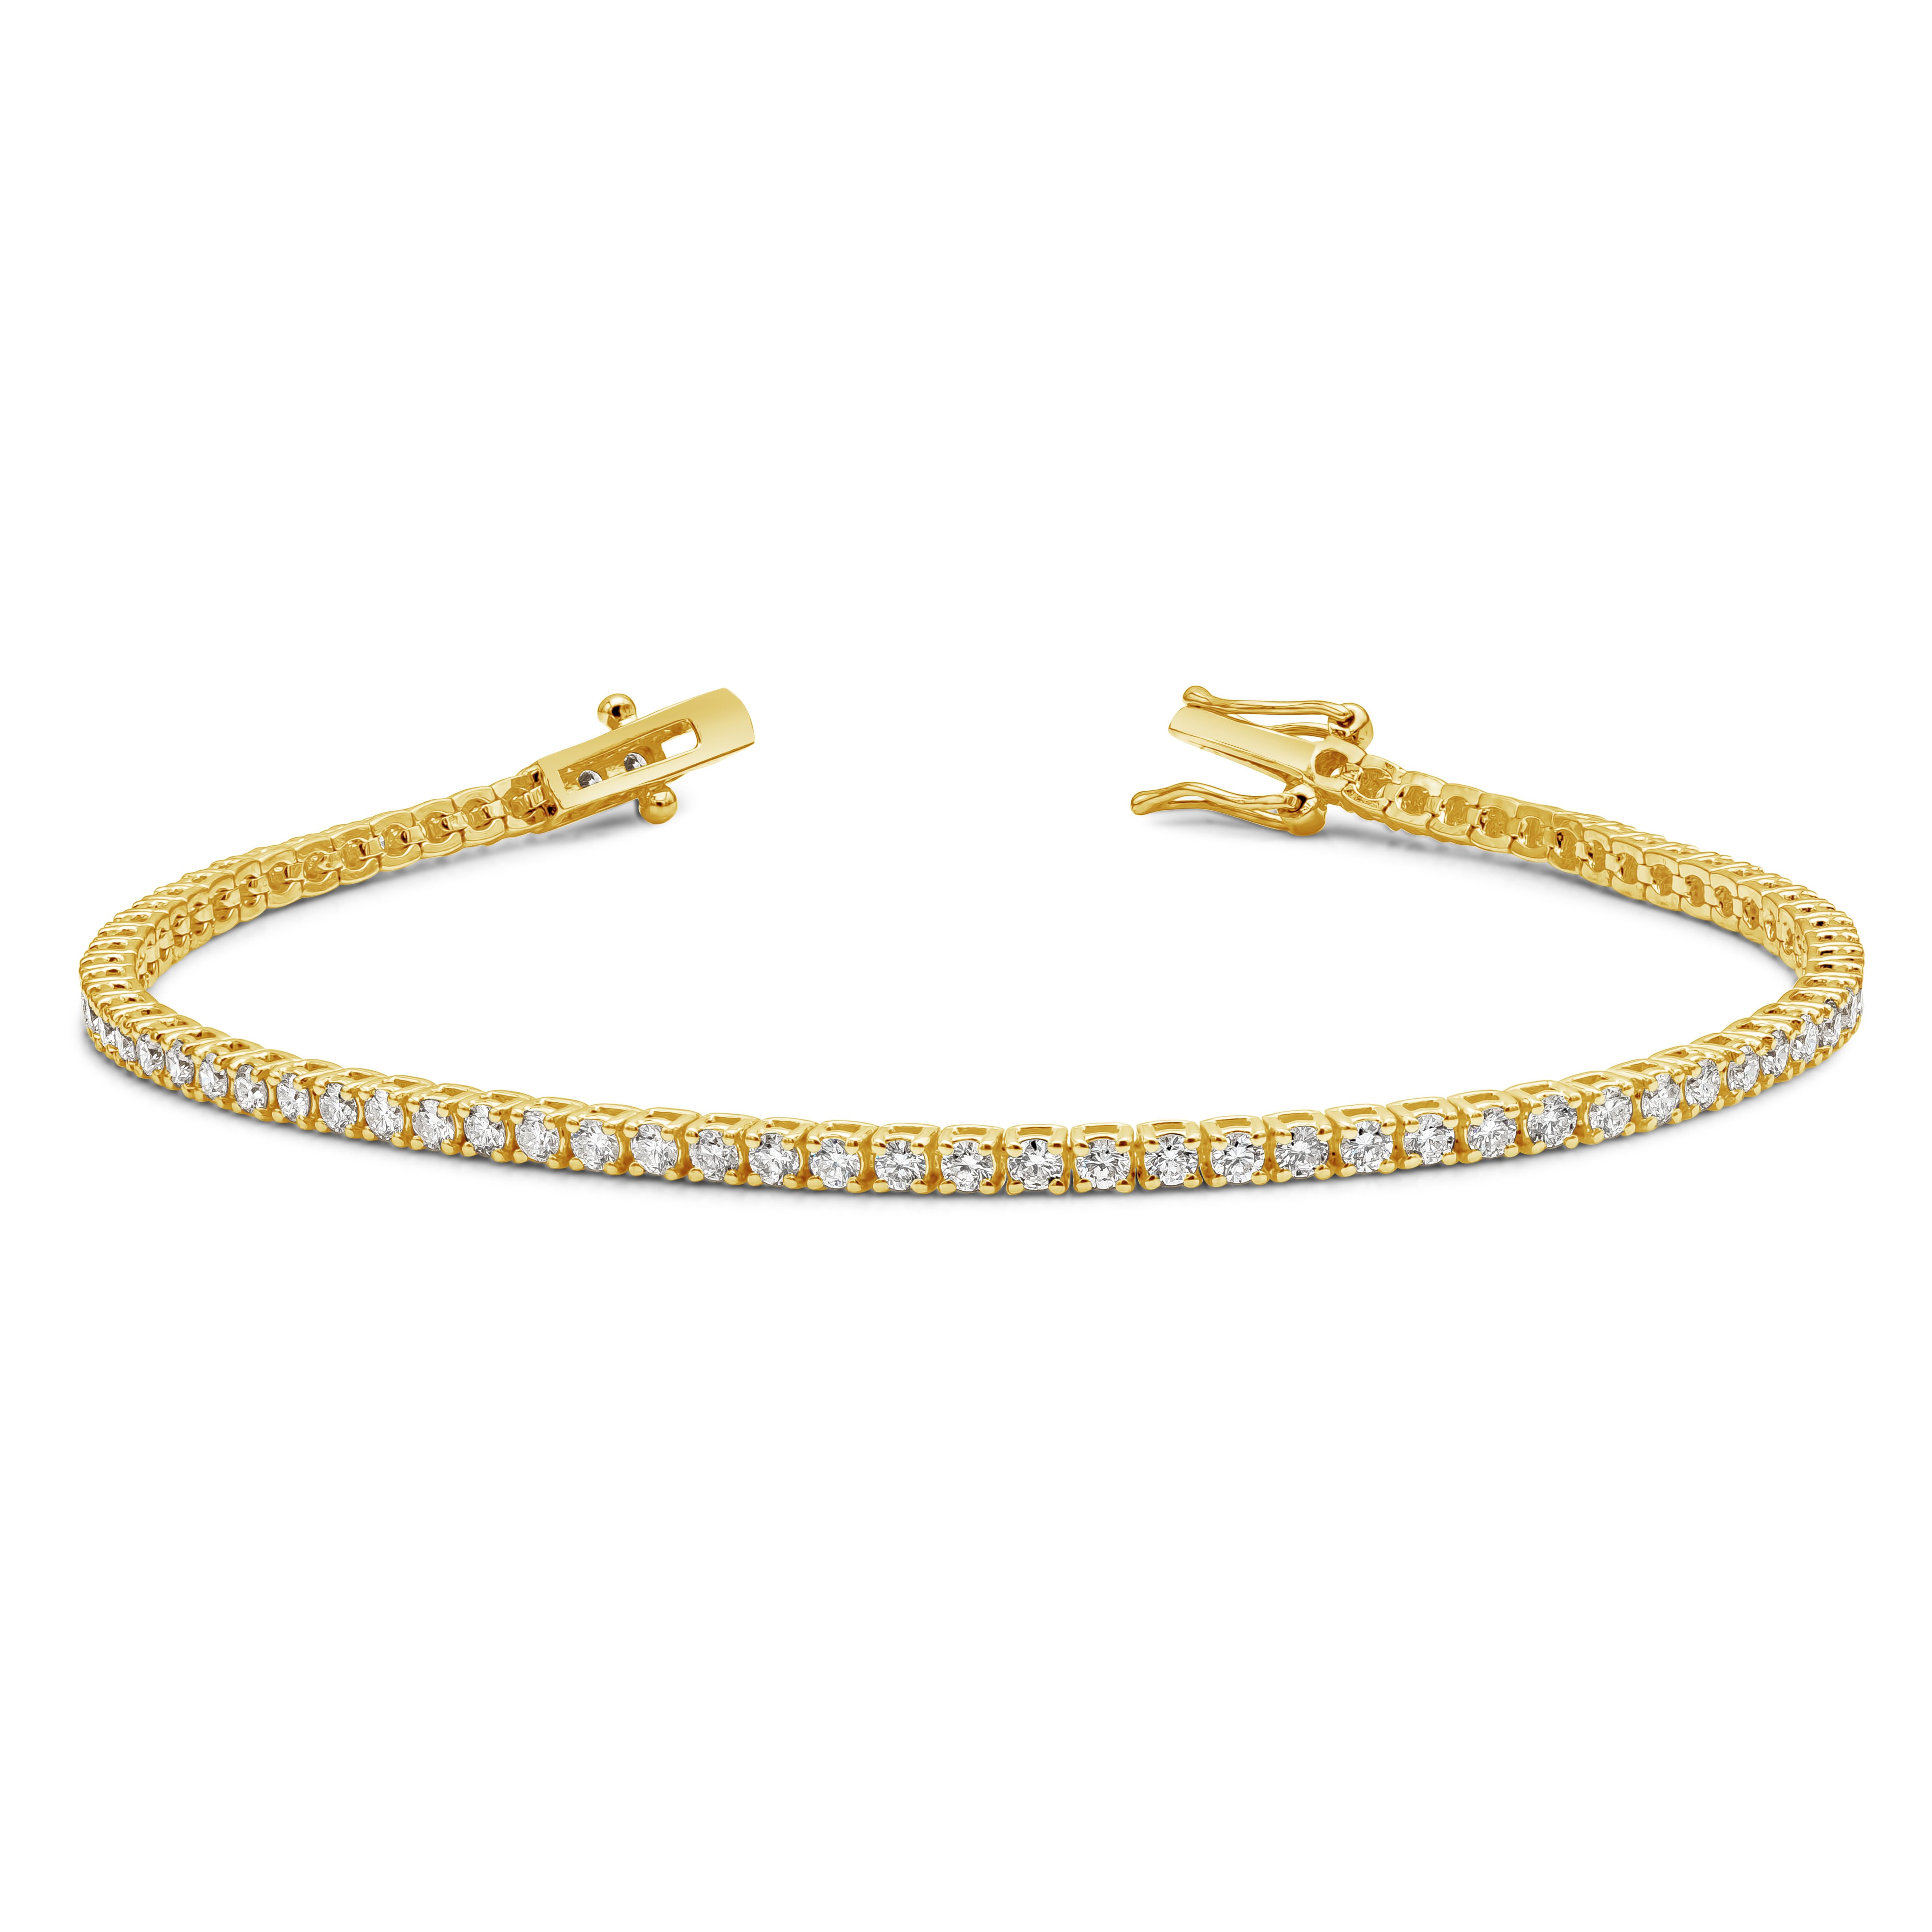 ﻿A classic tennis bracelet style showcasing 75 round brilliant diamonds weighing 2.04 carats total, F-G  Color and VS-SI in Clarity. Made with 18K Yellow Gold. 1.90mm Width and 7 inches in Length. 

Style available in different price ranges. Prices